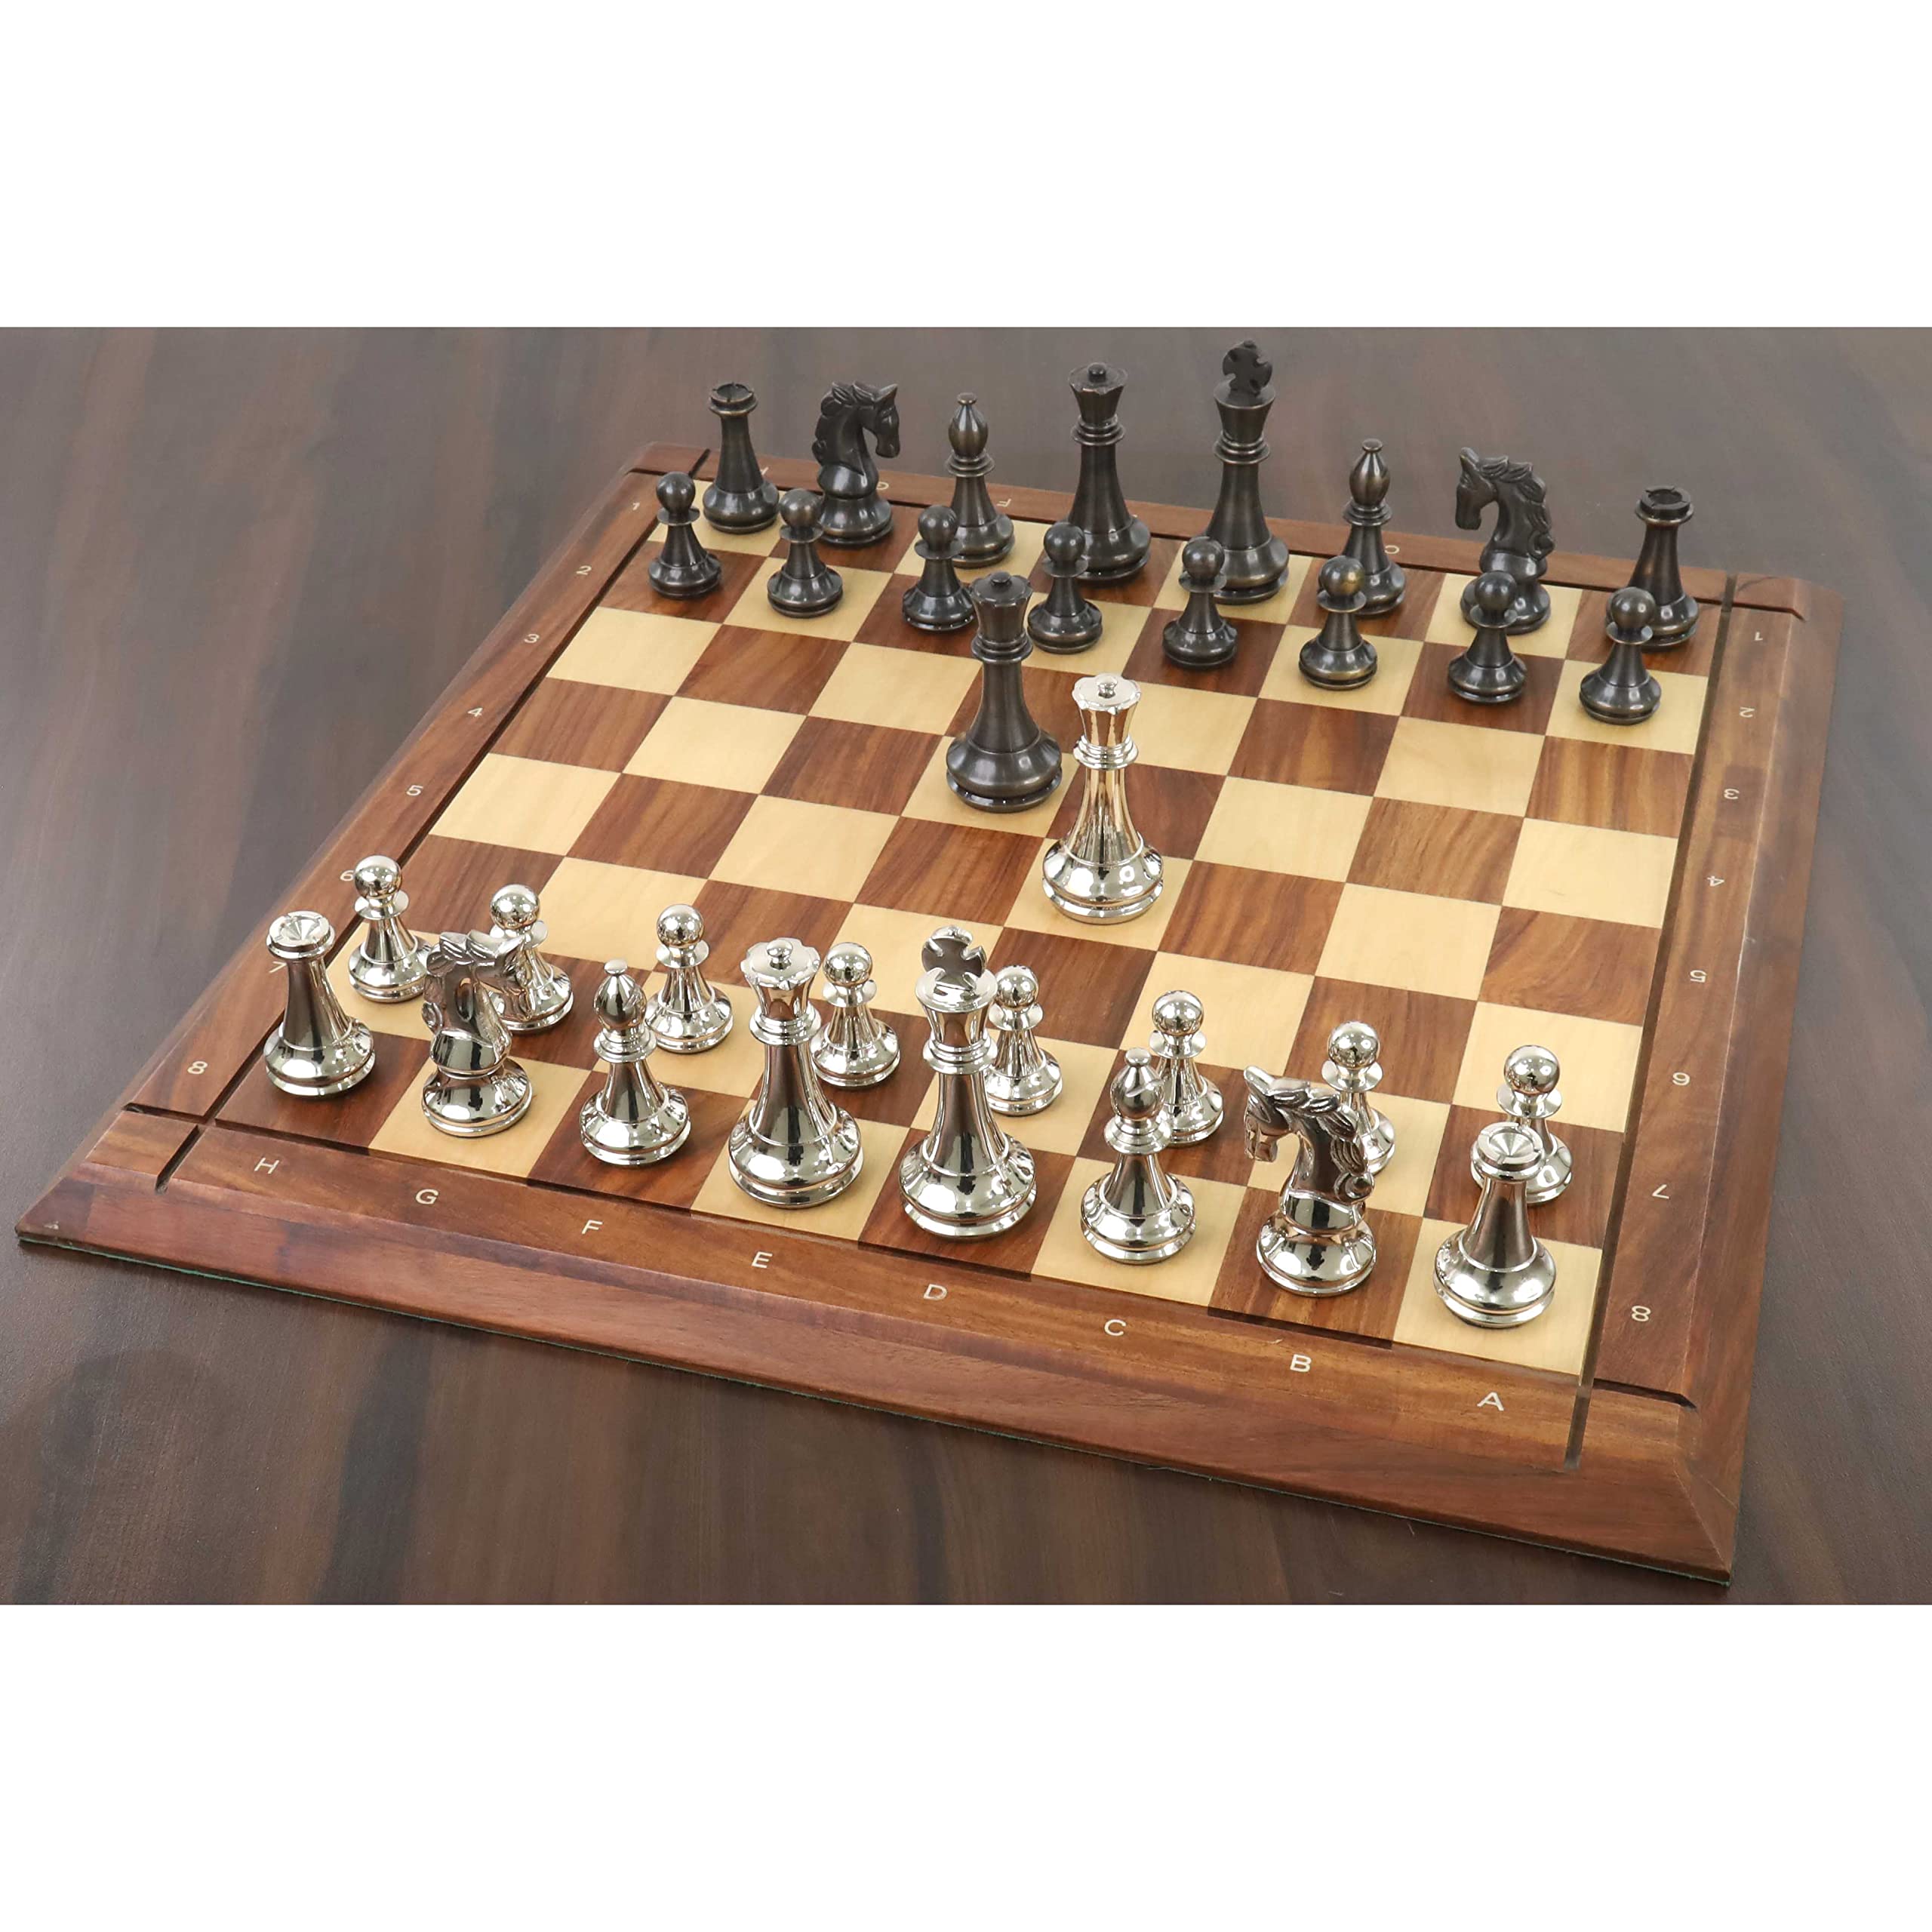 Royal Chess Mall Staunton Chess Pieces Only Metal Chess Set, Brass, 4.3-in King, Staunton-Inspired Luxury Chess Set, Triple Weighted Chess Pieces (7.7 lbs)